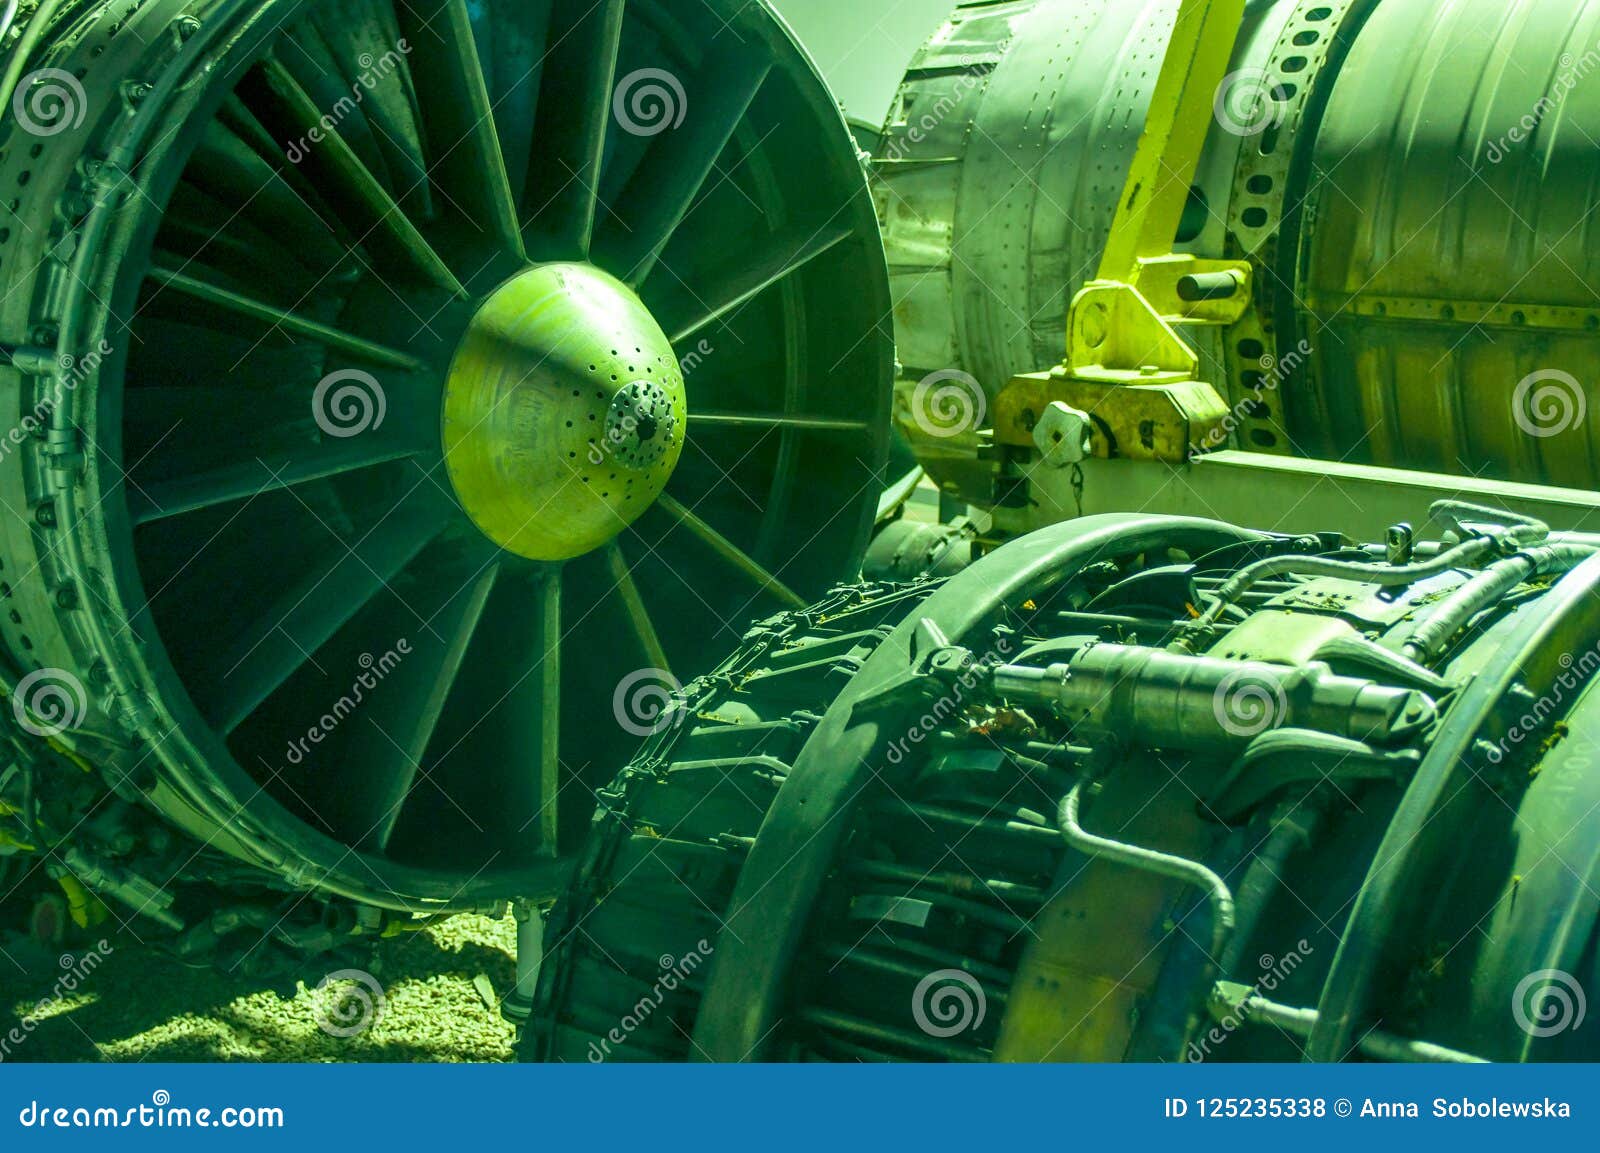 aerospace engineering, pieces of aircraft machinery,